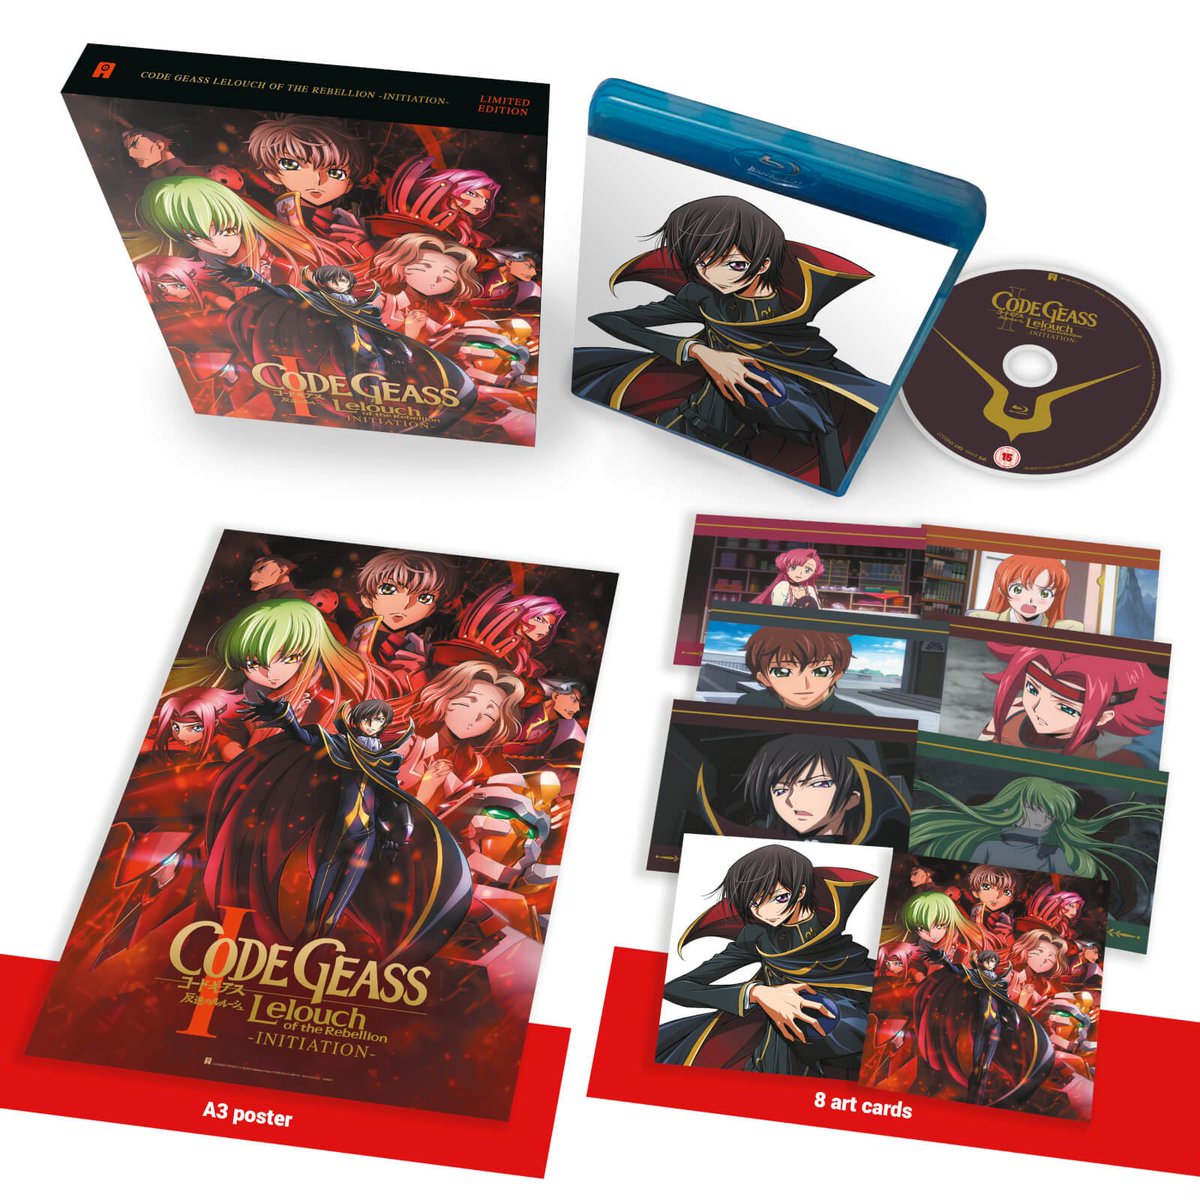 Zavvi Calling All Anime Fans Pre Orders Are Now Live For Code Geass Lelouch Of The Rebellion I Initiation Collector S Edition Limited To 500 Copies Blu Ray T Co Sdvnnain0e T Co 9jtk7sid4i